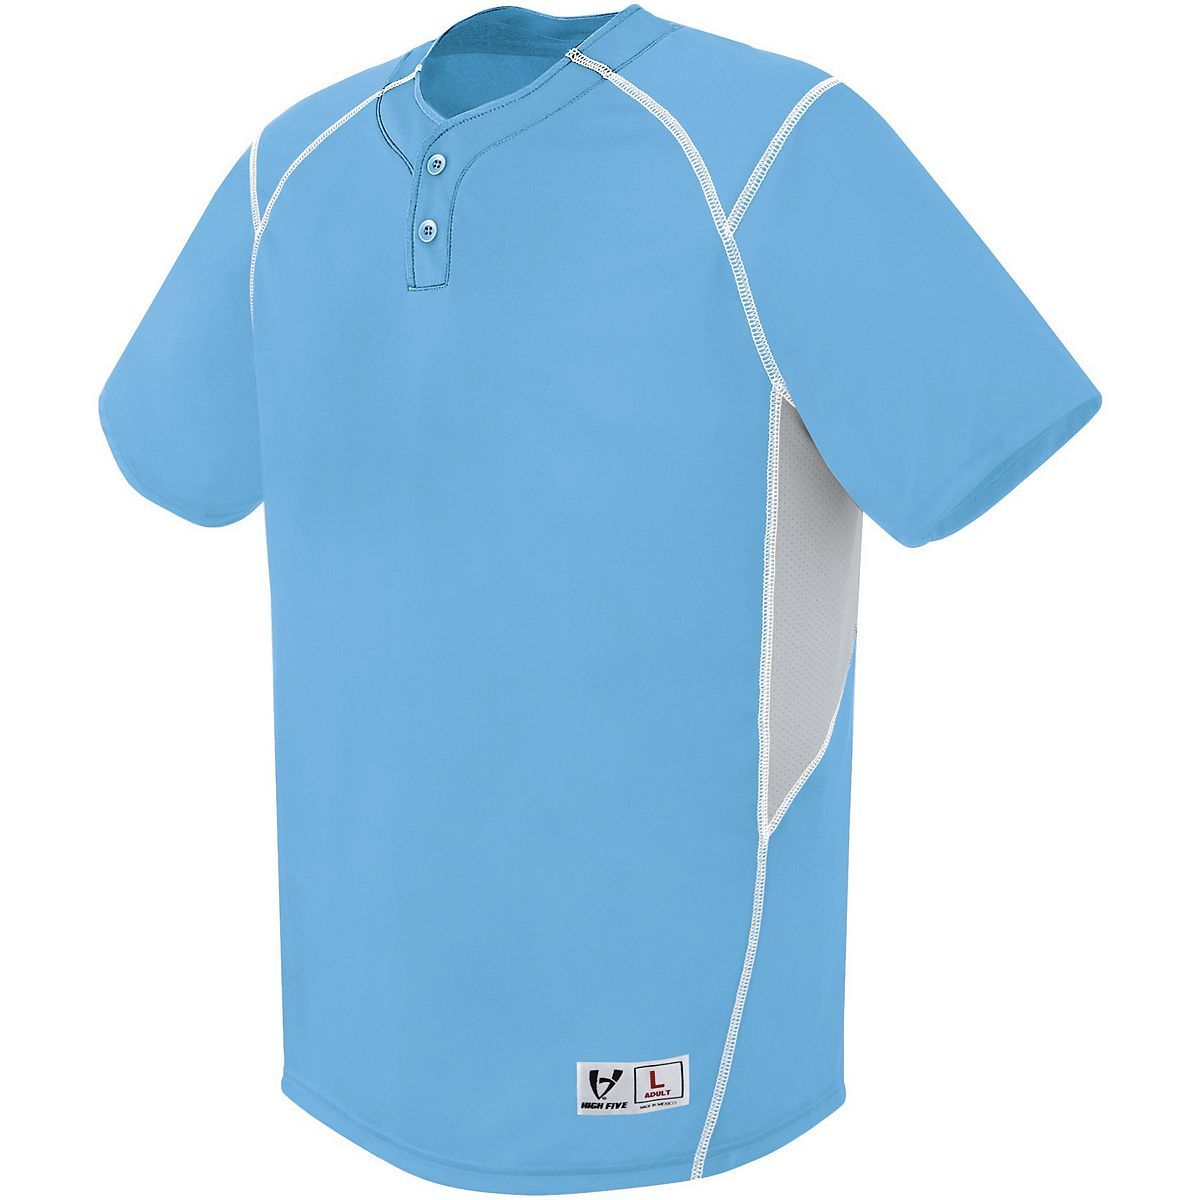 Augusta Sportswear Bandit Two-Button Jersey in Columbia Blue/Silver Grey/White  -Part of the Adult, Adult-Jersey, Augusta-Products, Baseball, Shirts, All-Sports, All-Sports-1 product lines at KanaleyCreations.com